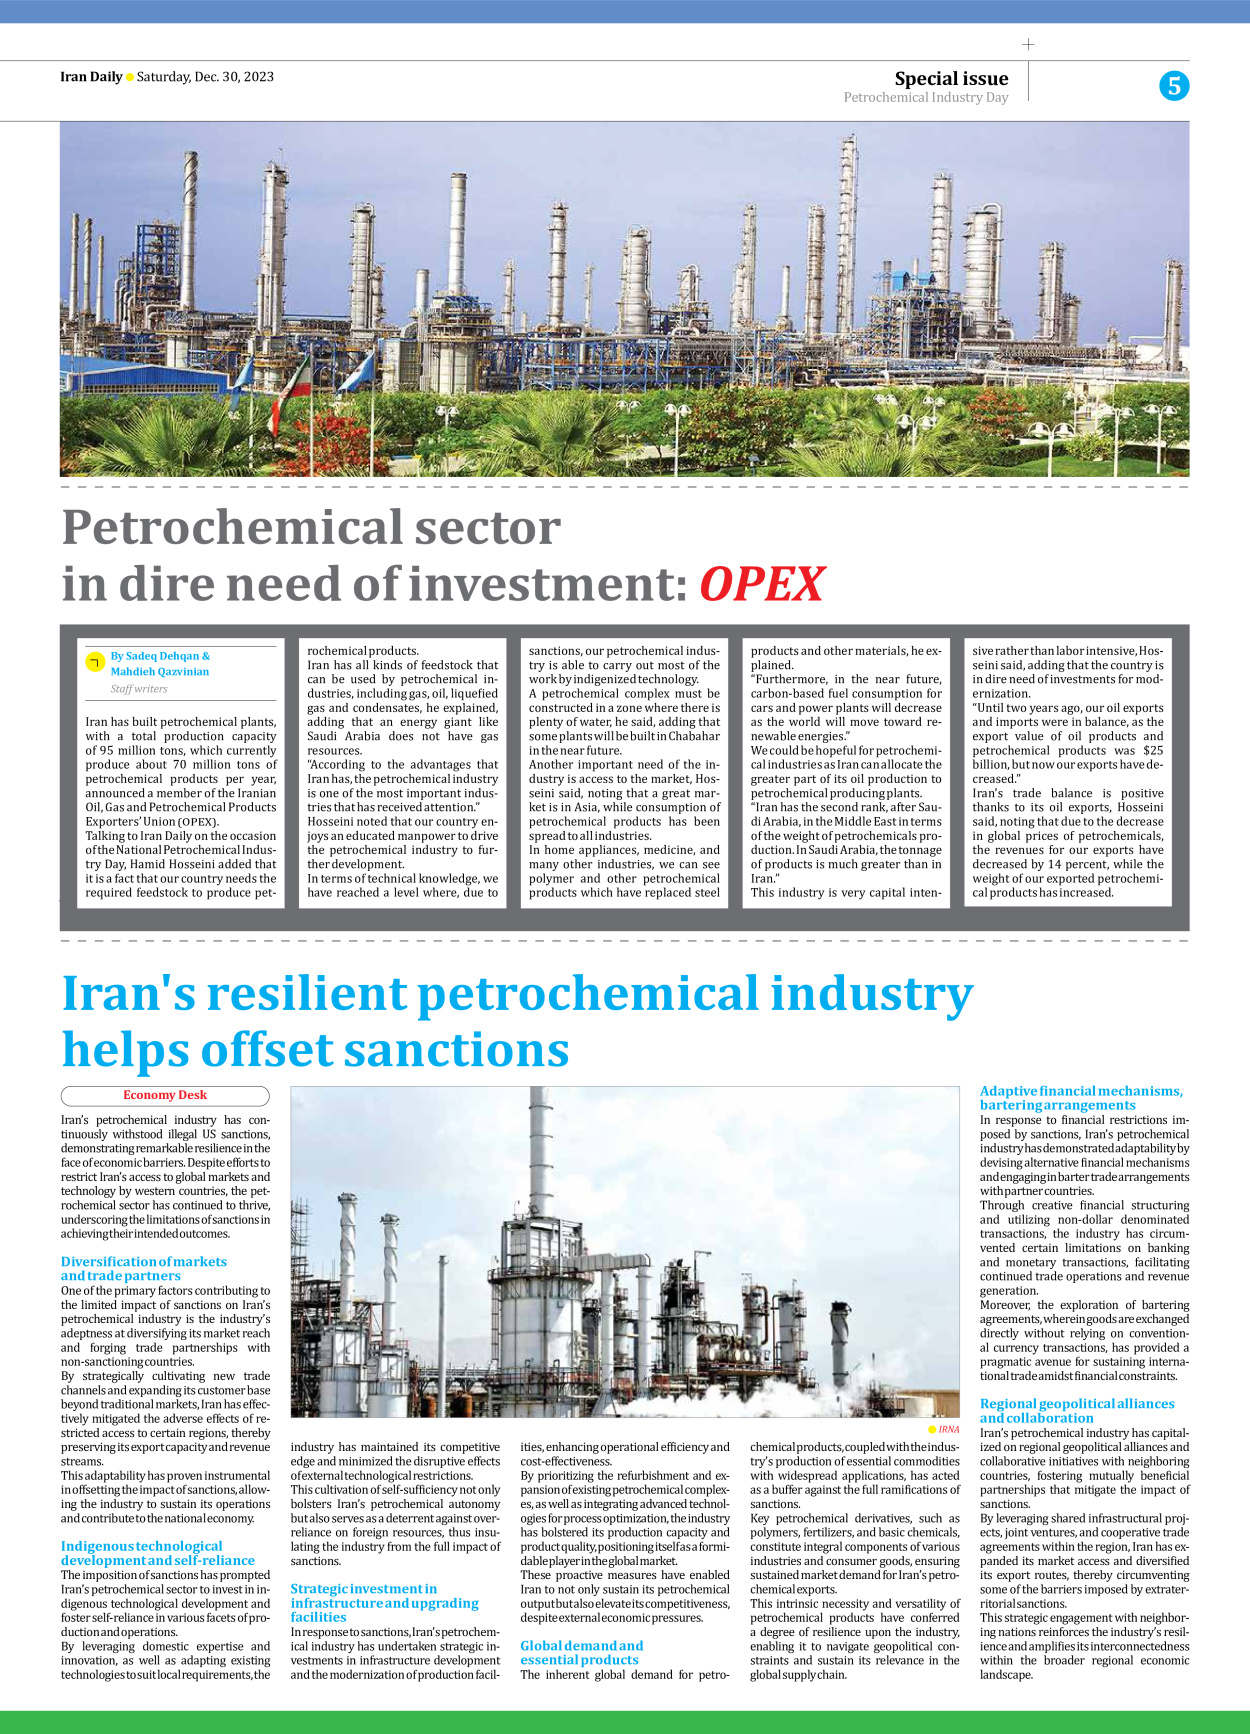 Iran Daily - Number Seven Thousand Four Hundred and Seventy One - 30 December 2023 - Page 5